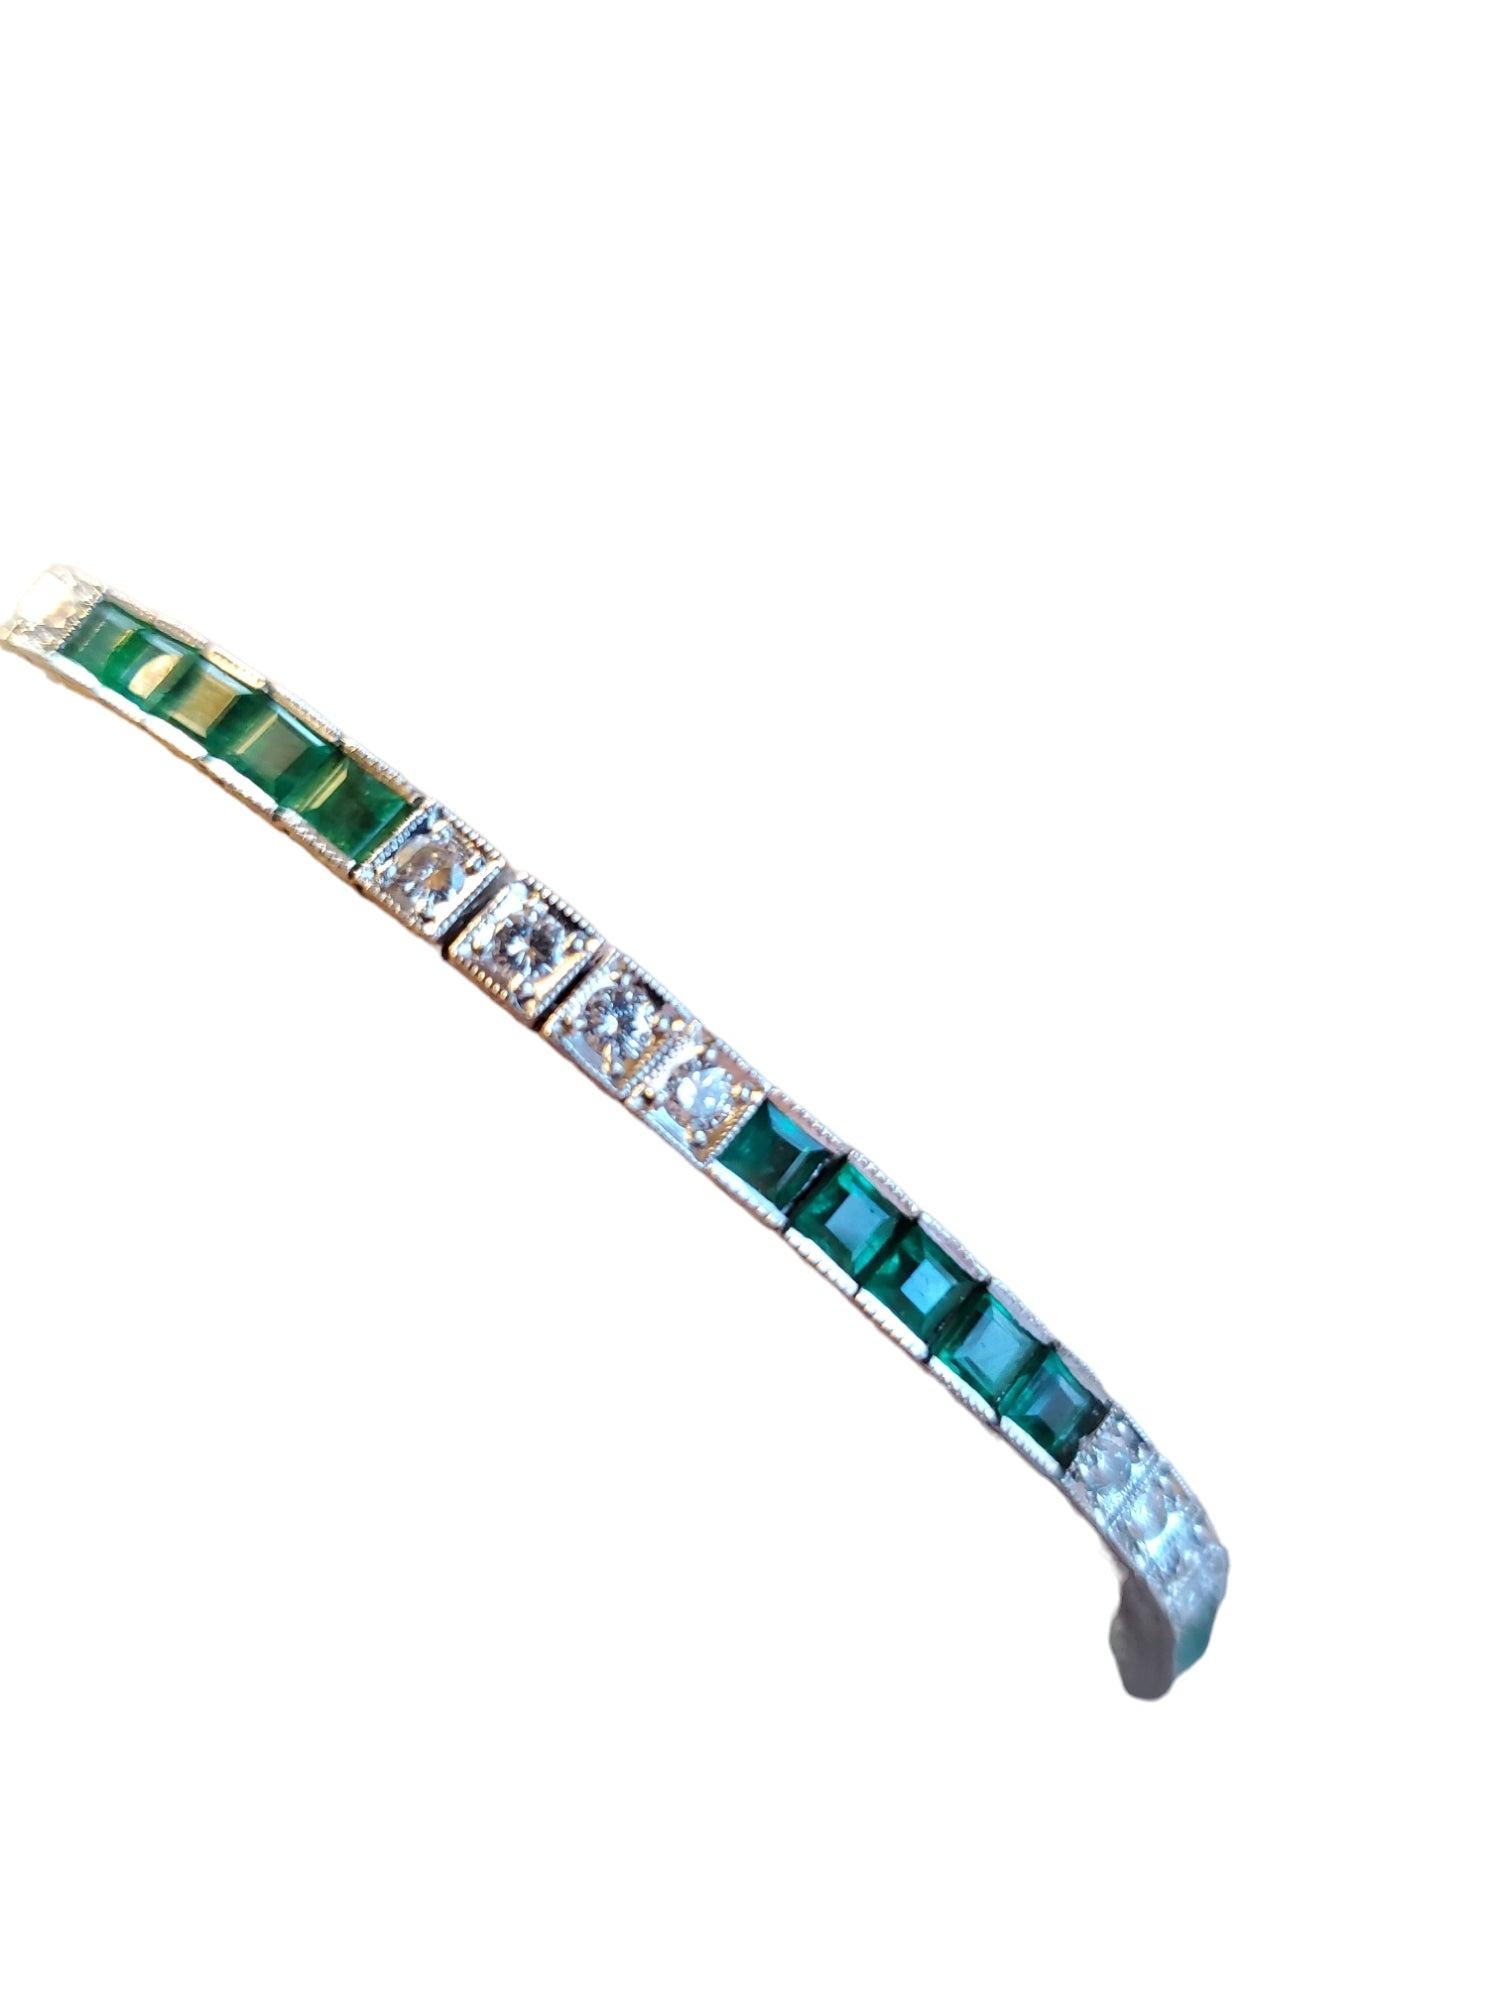 Listed is a midcentury made Art Deco style Platinum Diamond and natural emerald bracelet. There are approximately .96 carats colorless to near colorless F-H color VS round brilliant diamonds and green natural emeralds. The bracelet is heavy platinum